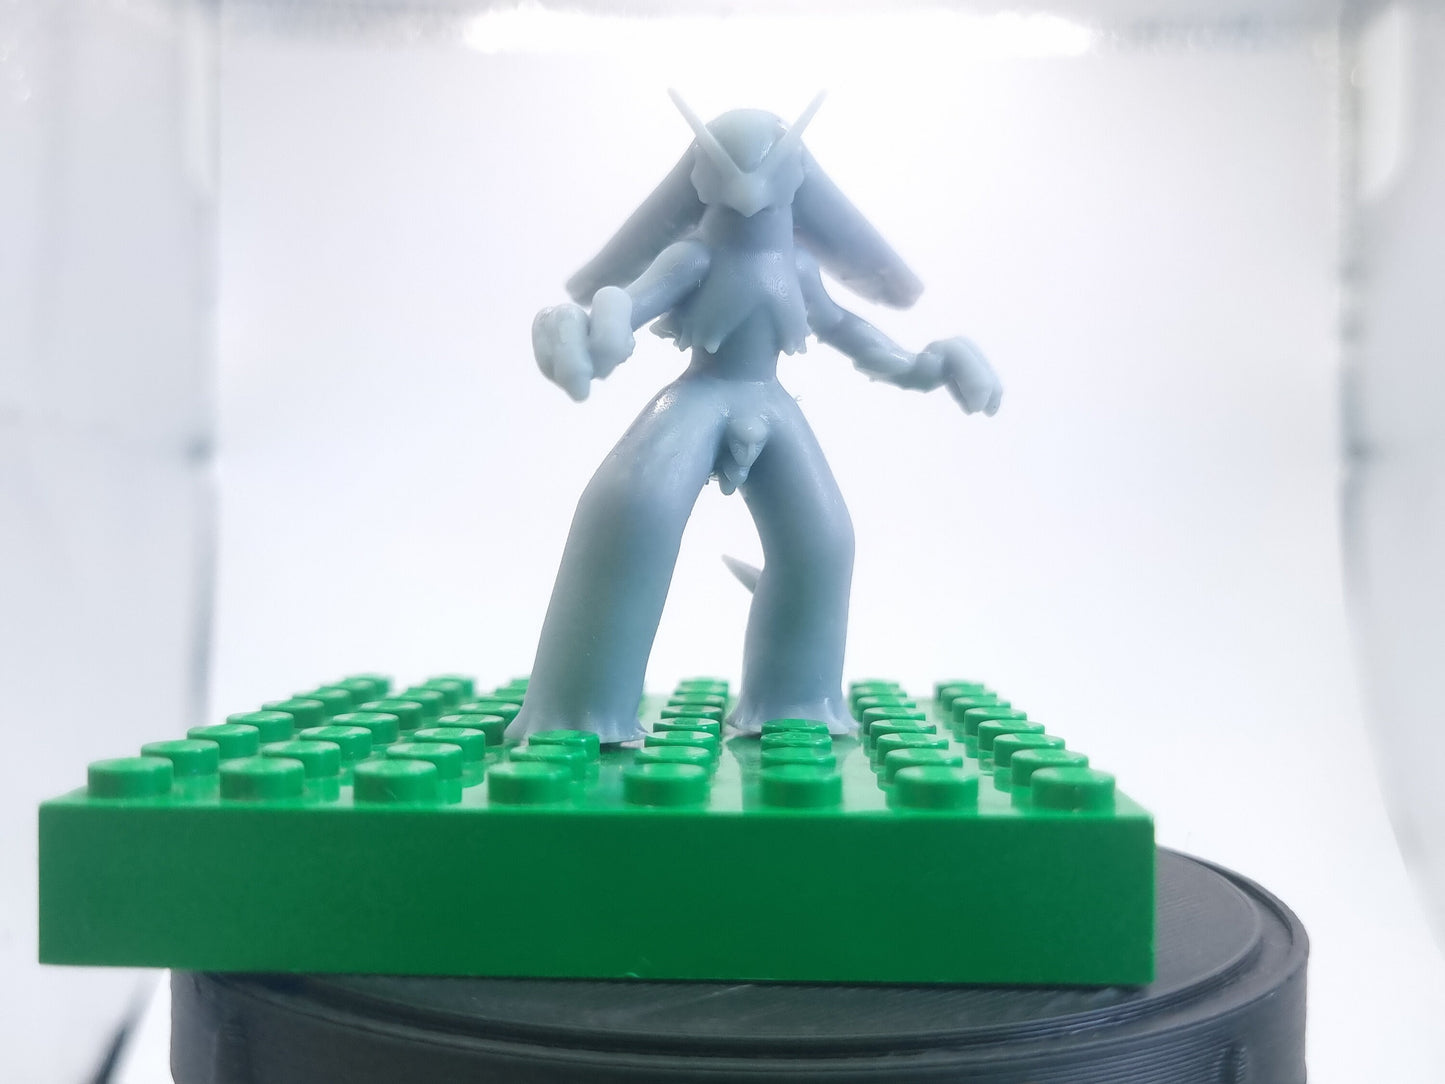 Building toy custom 3D printed fighter figure